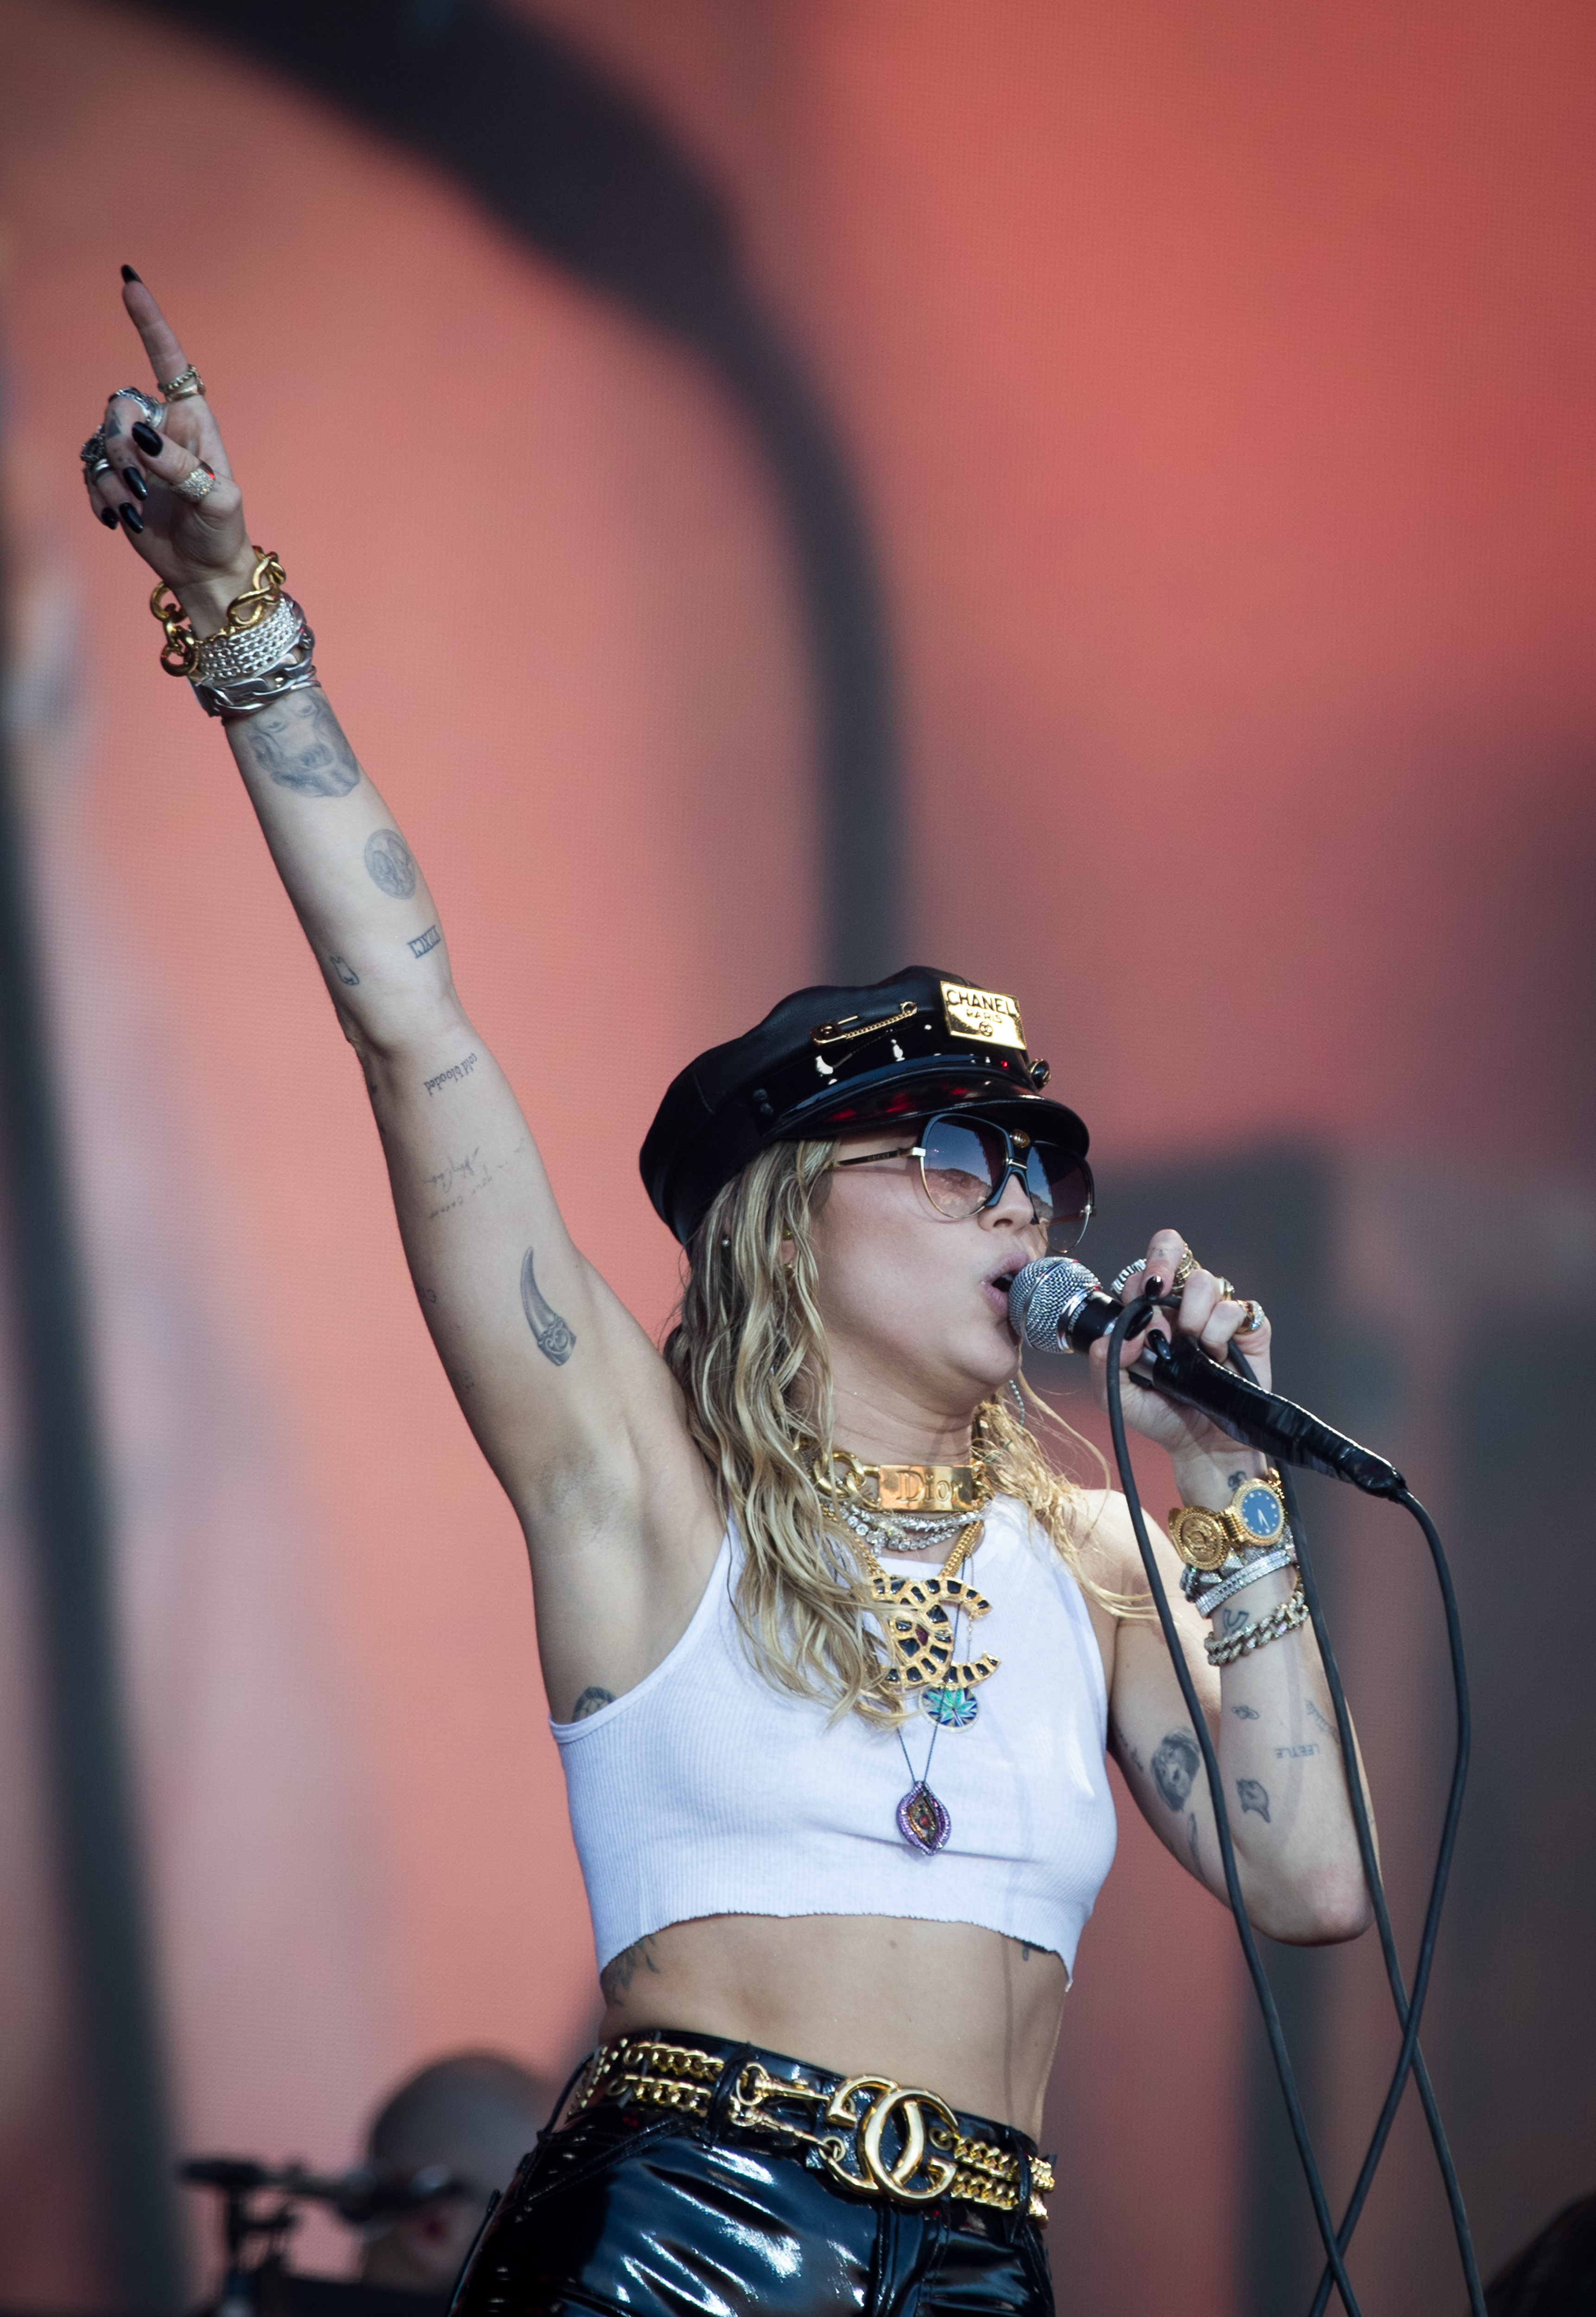 Miley Ray Cyrus performs live on the Pyramid stage during the 2019 Glastonbury Festival at Worthy Farm, Pilton on June 30, 2019 in Glastonbury, England | Source: Getty Images